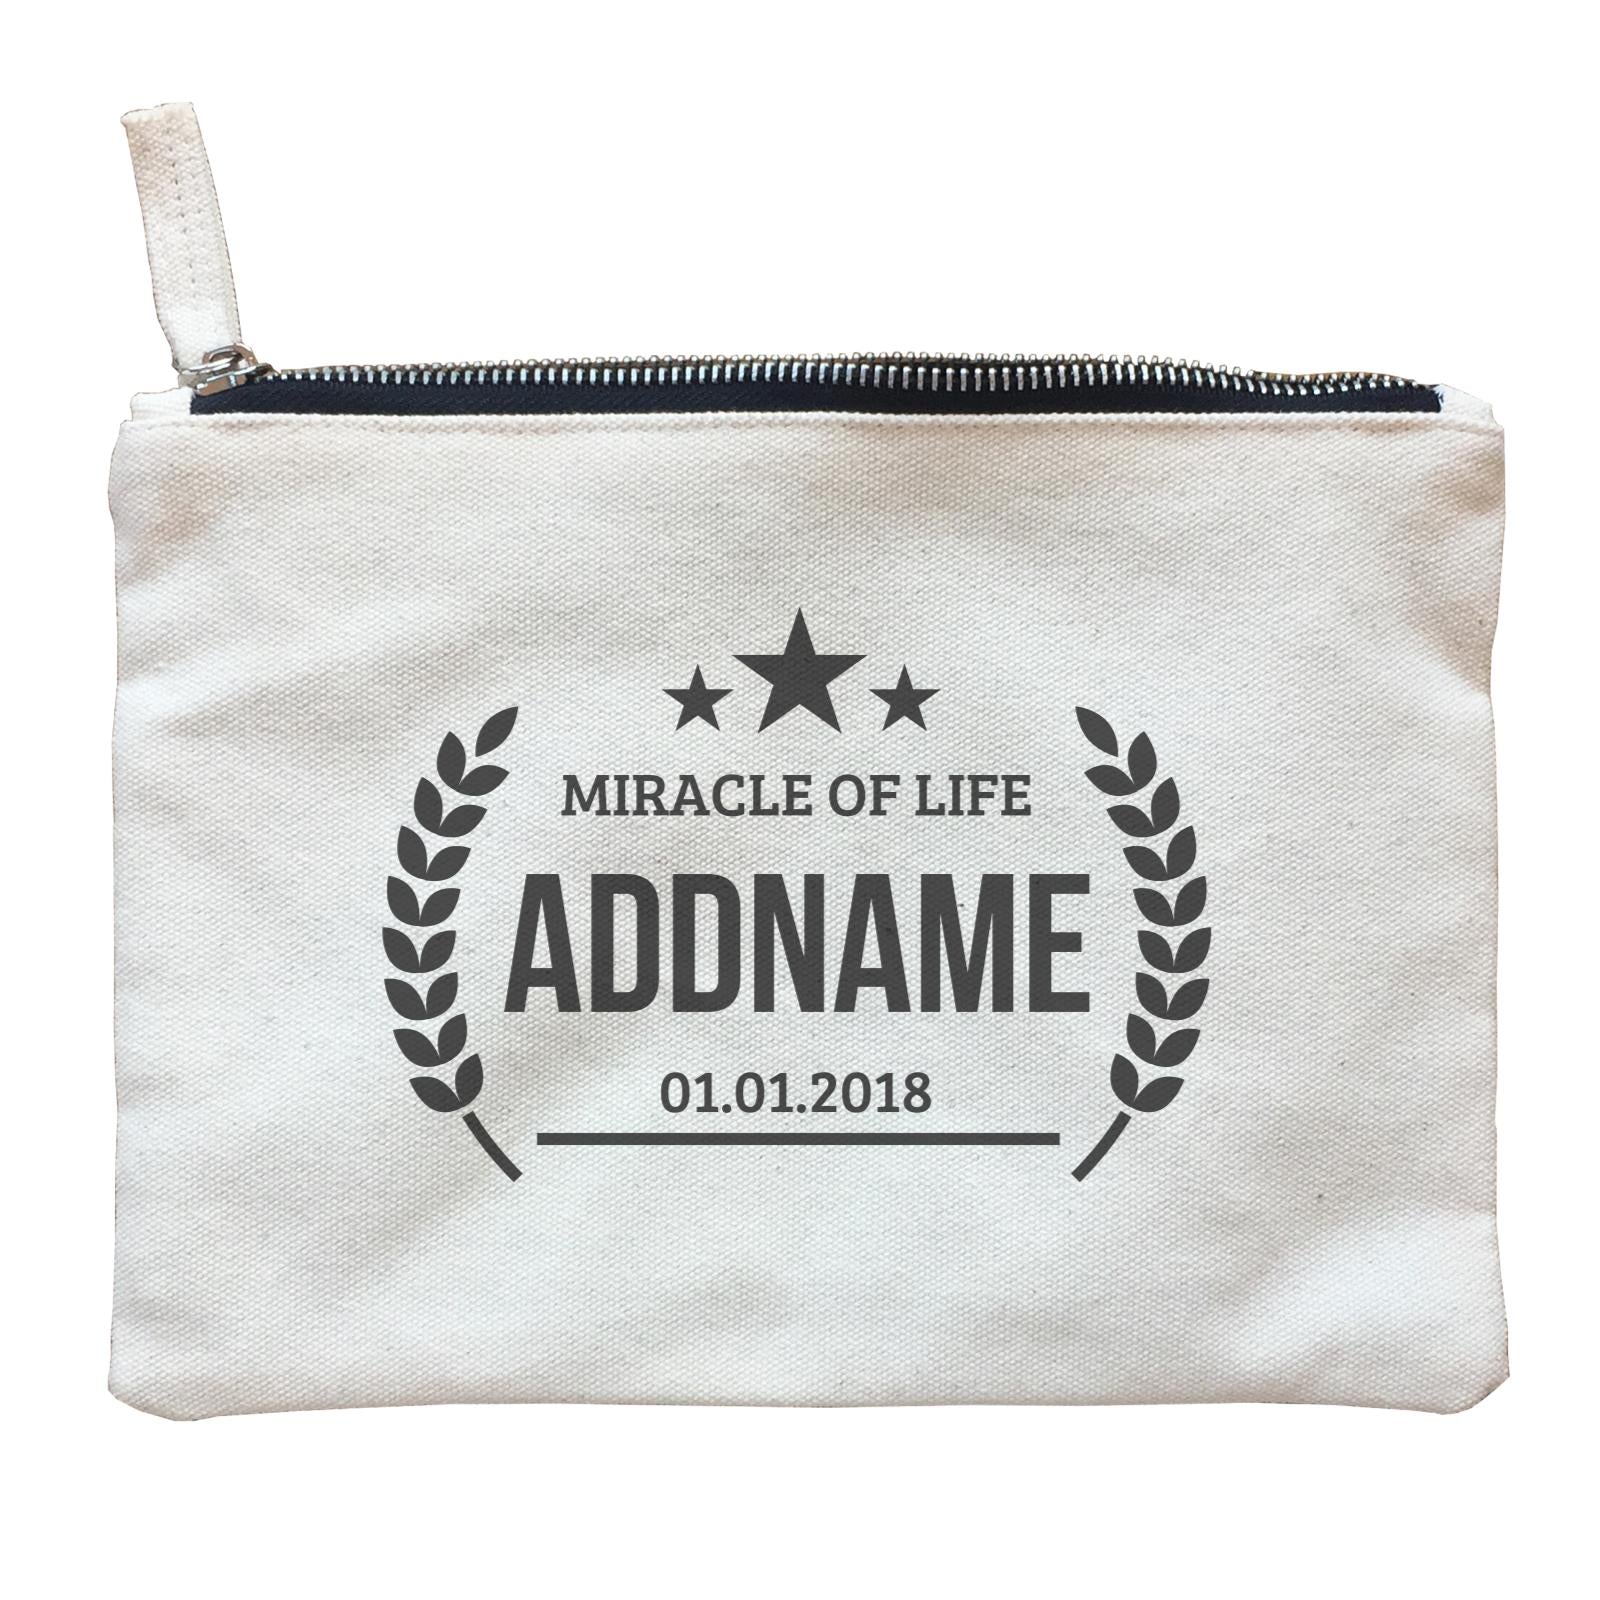 Miracle of Life with Stars Personalizable with Name and Date Zipper Pouch